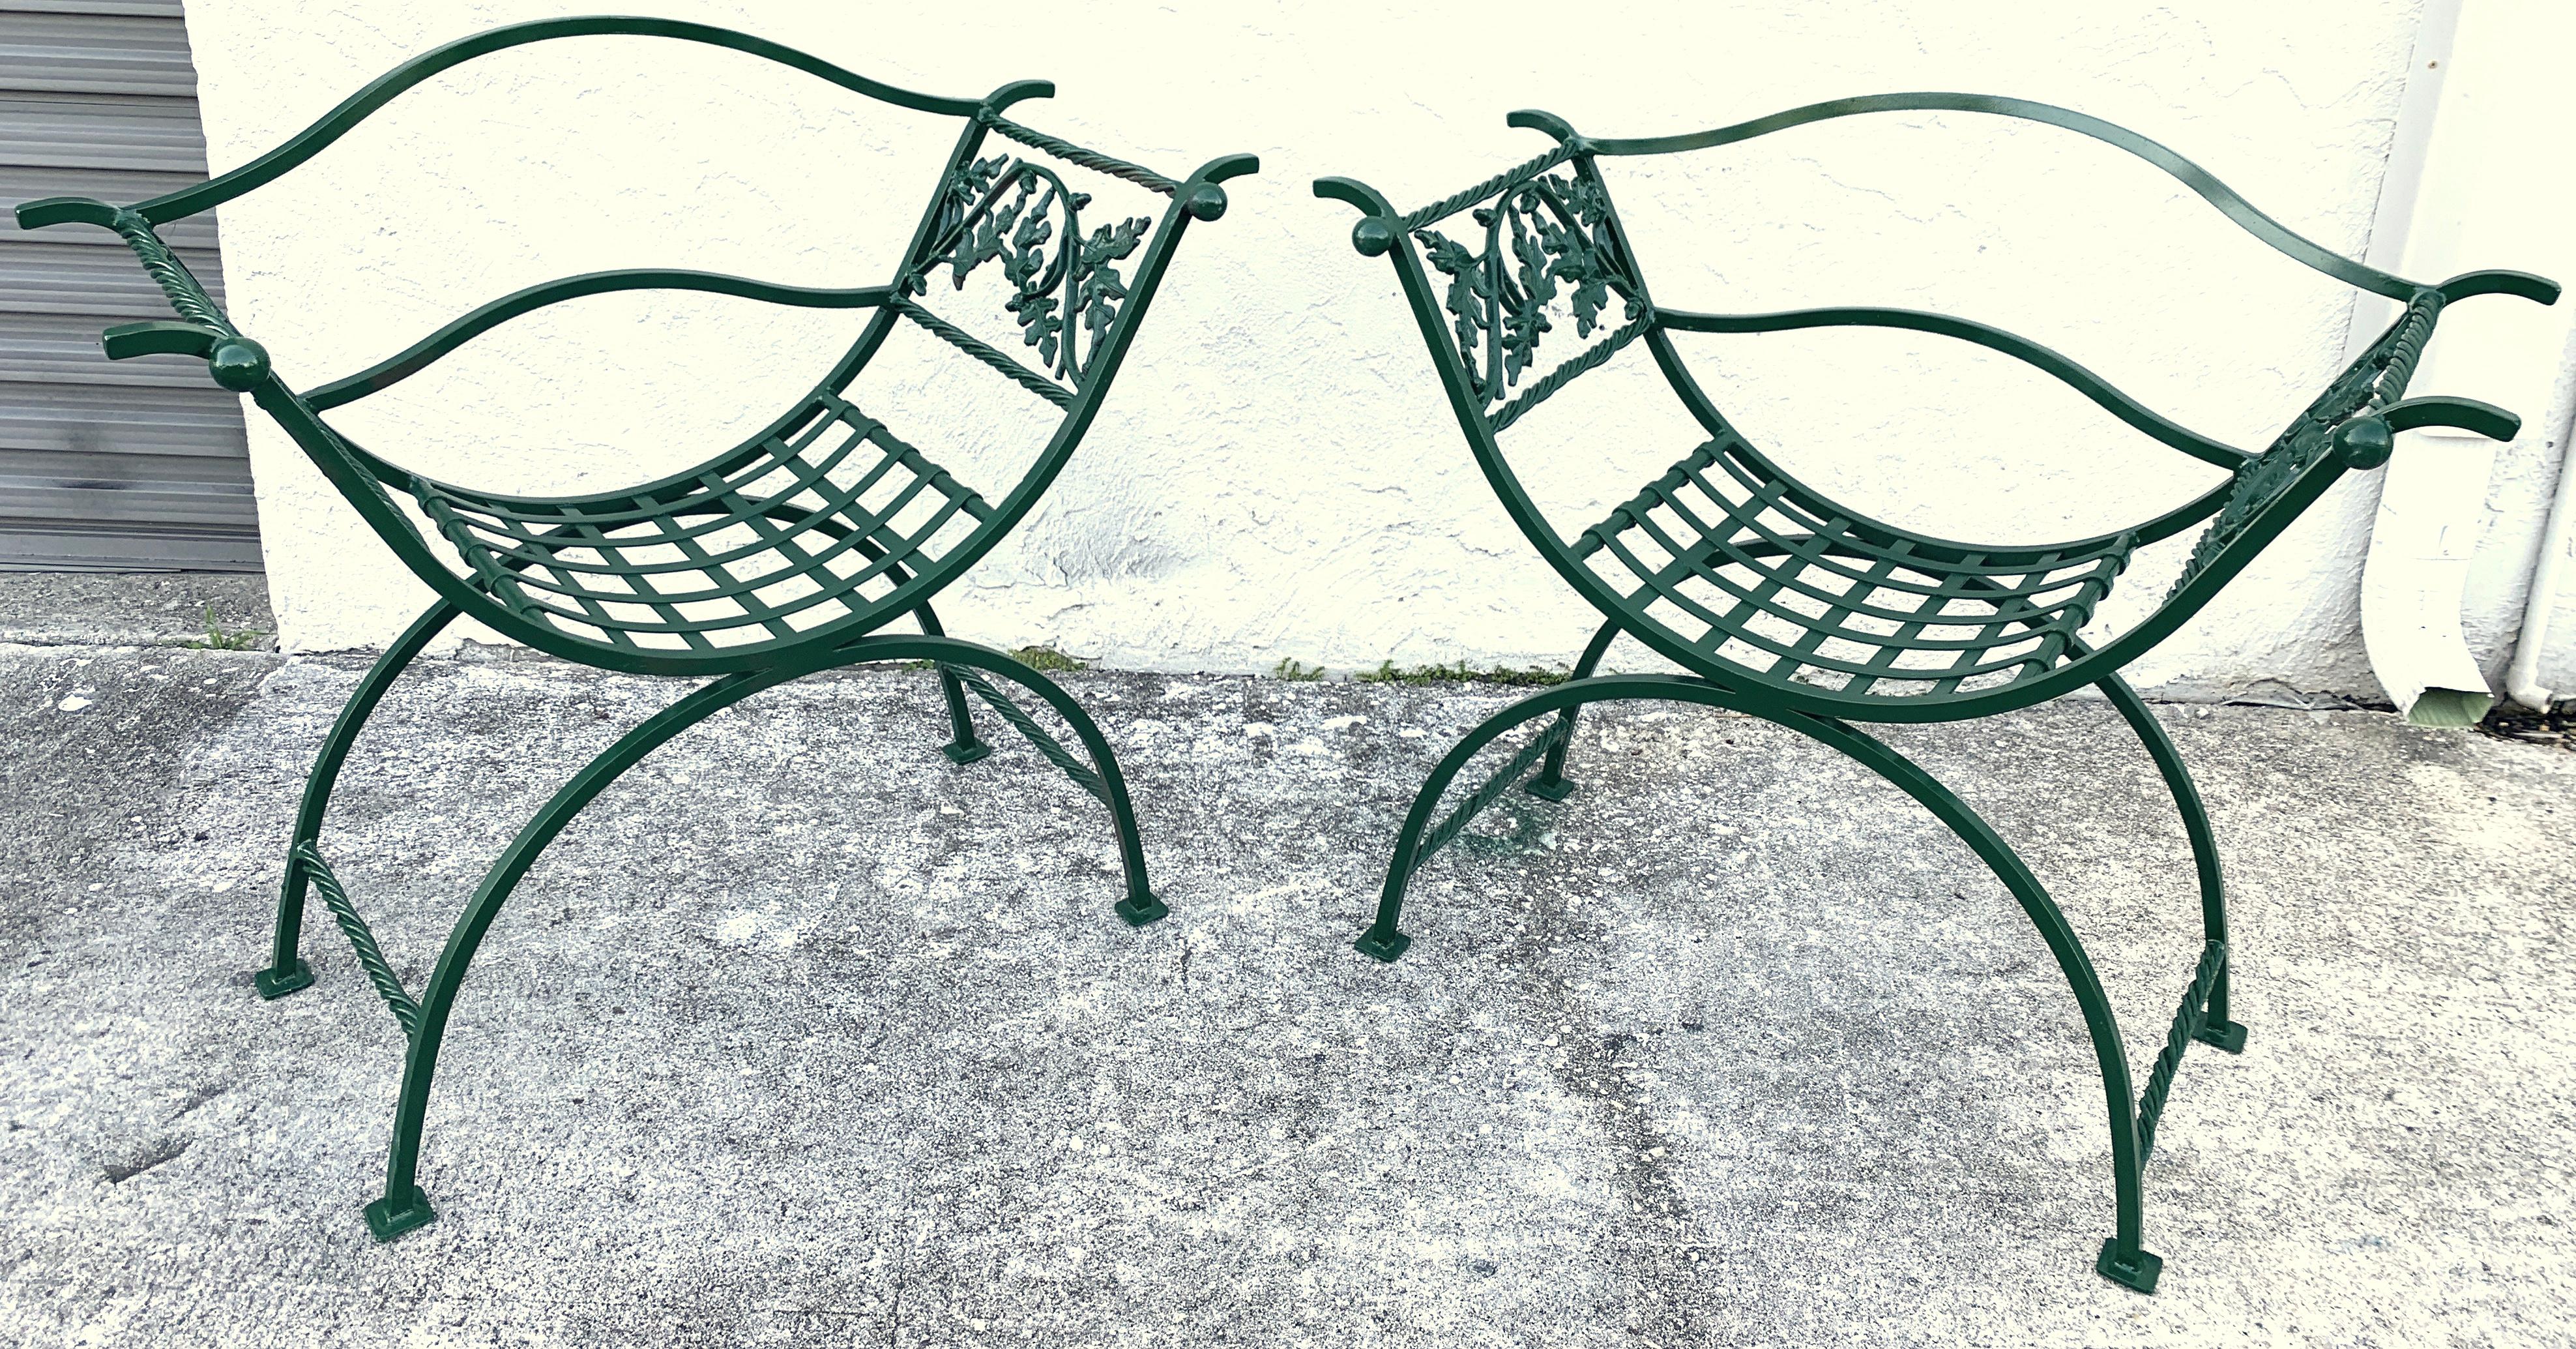 Pair of wrought iron oak leaf motif Curule benches, provenance Celine Dion
Each one of substantial size and weight, with pierced back rest and woven seats
Each bench measures 42